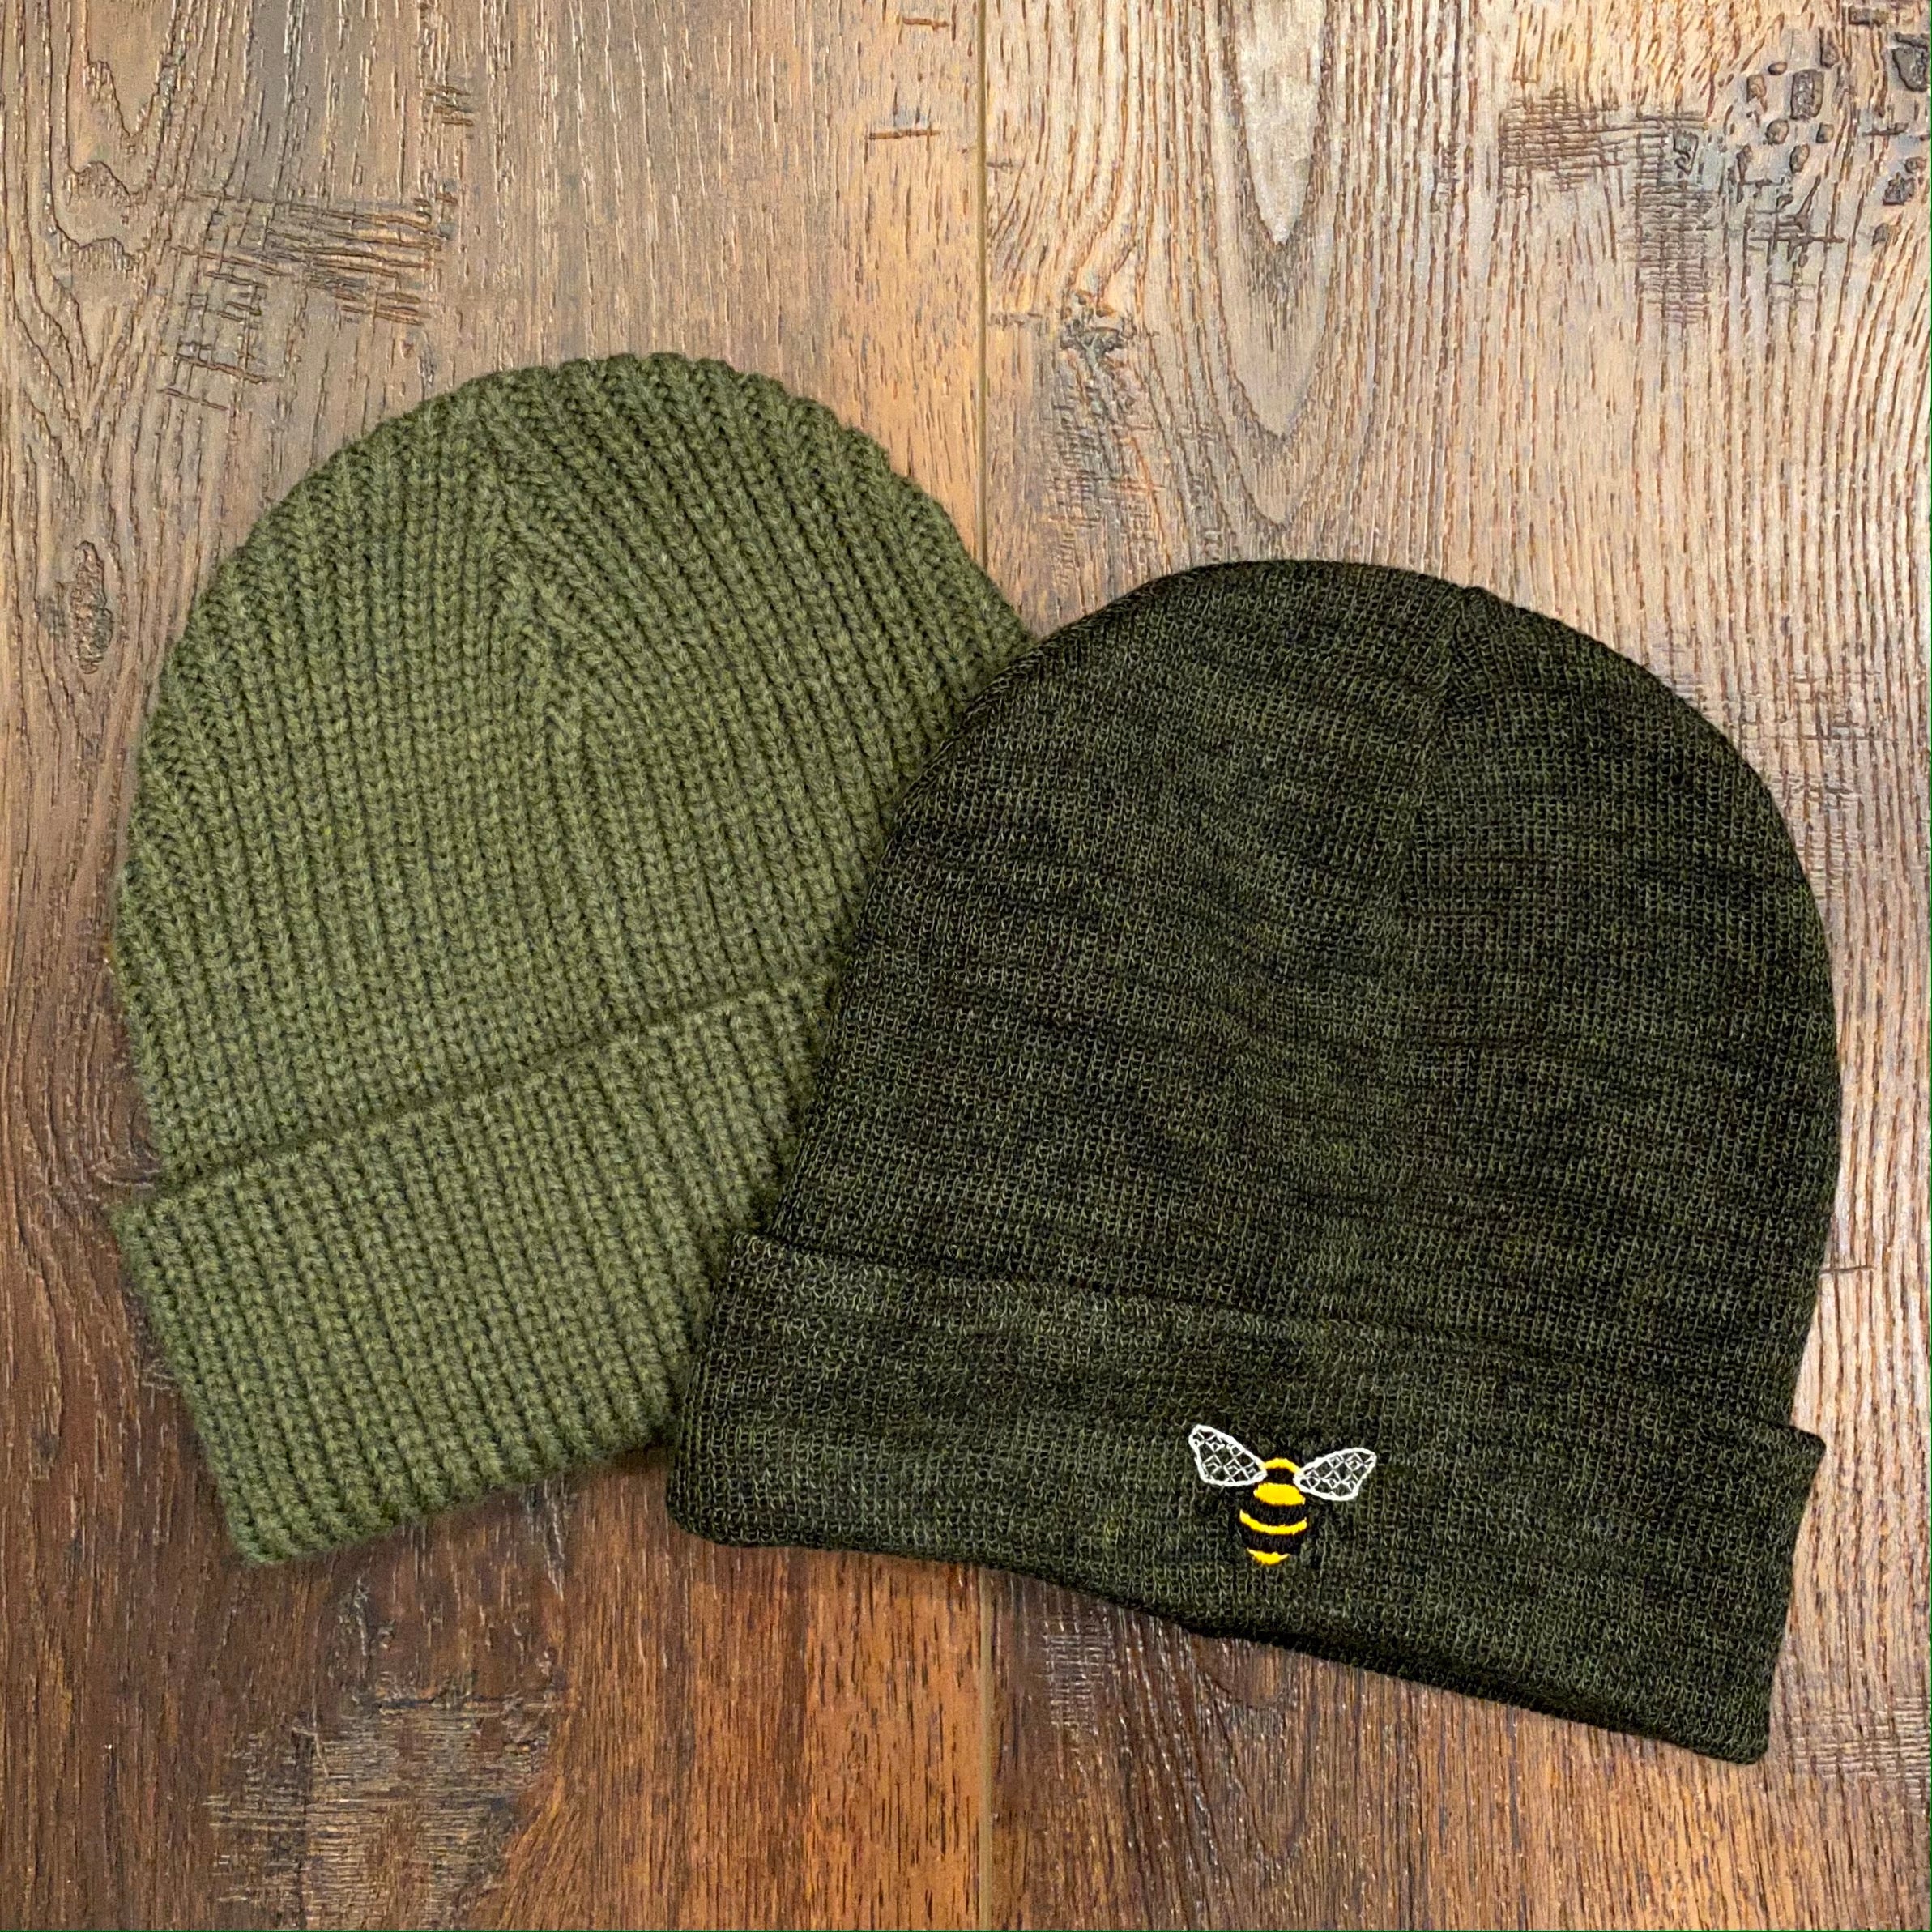 Go Tell the Bees inspired Honeybee Embroidered Beanies